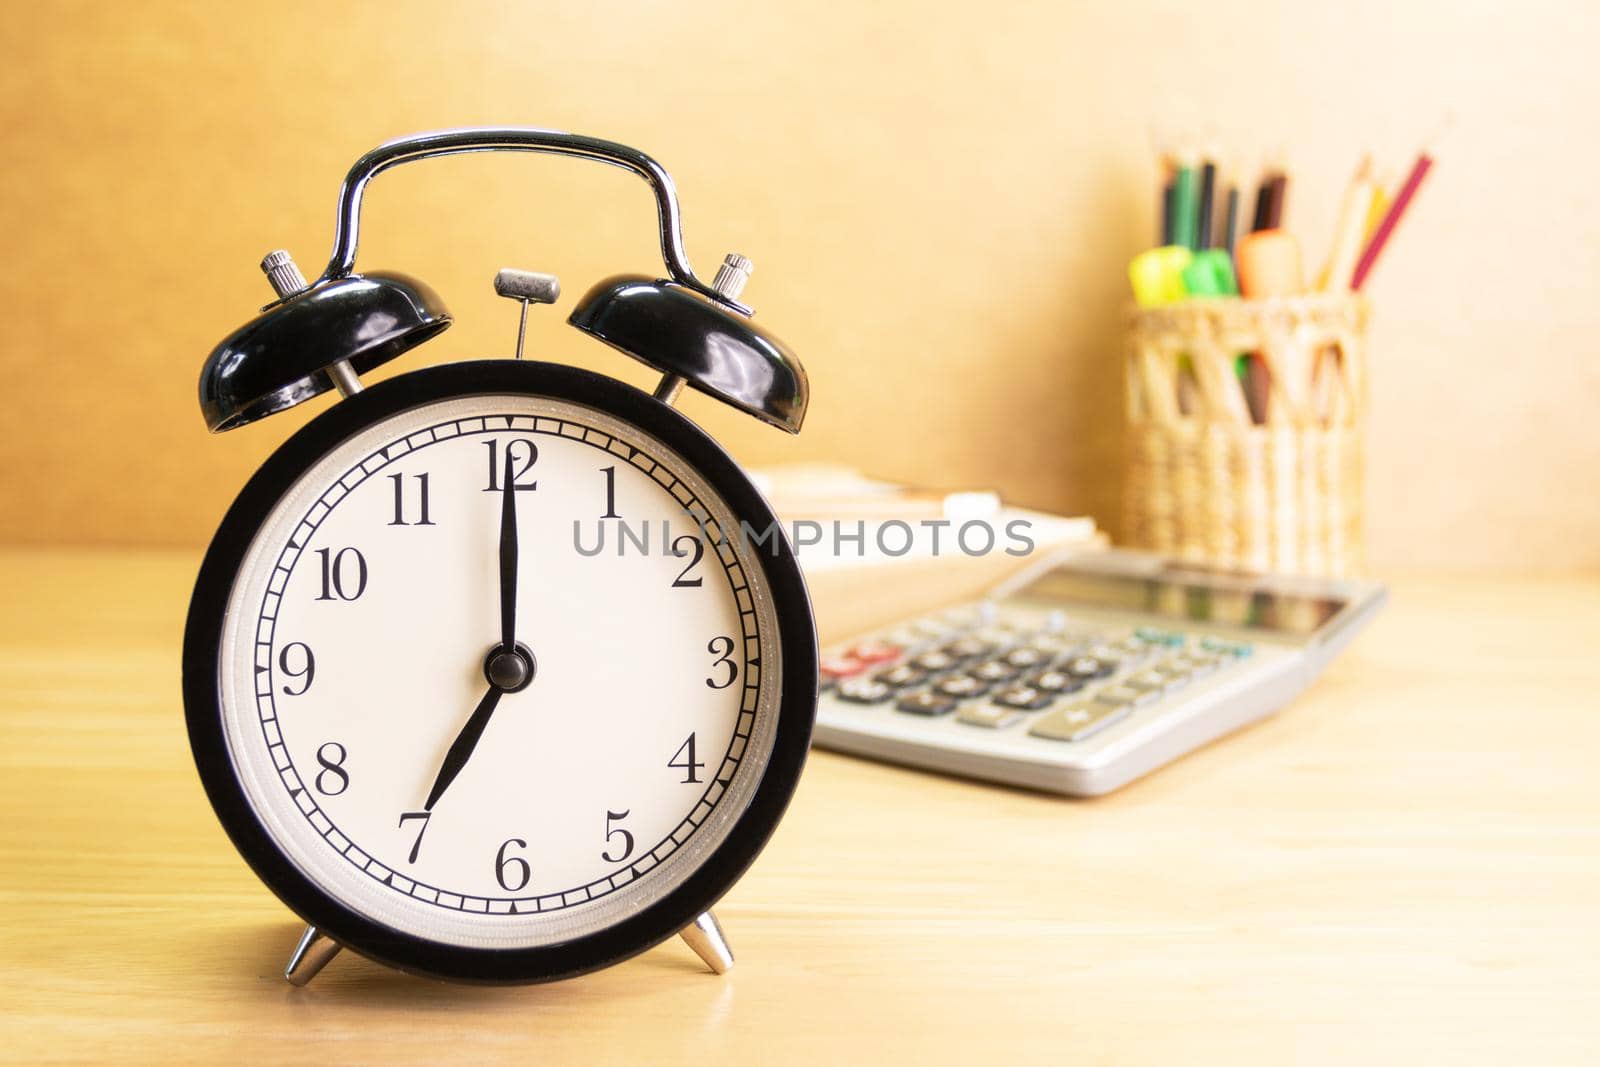 7 AM Clock on work desk in the office Time of business working concepts selective clock